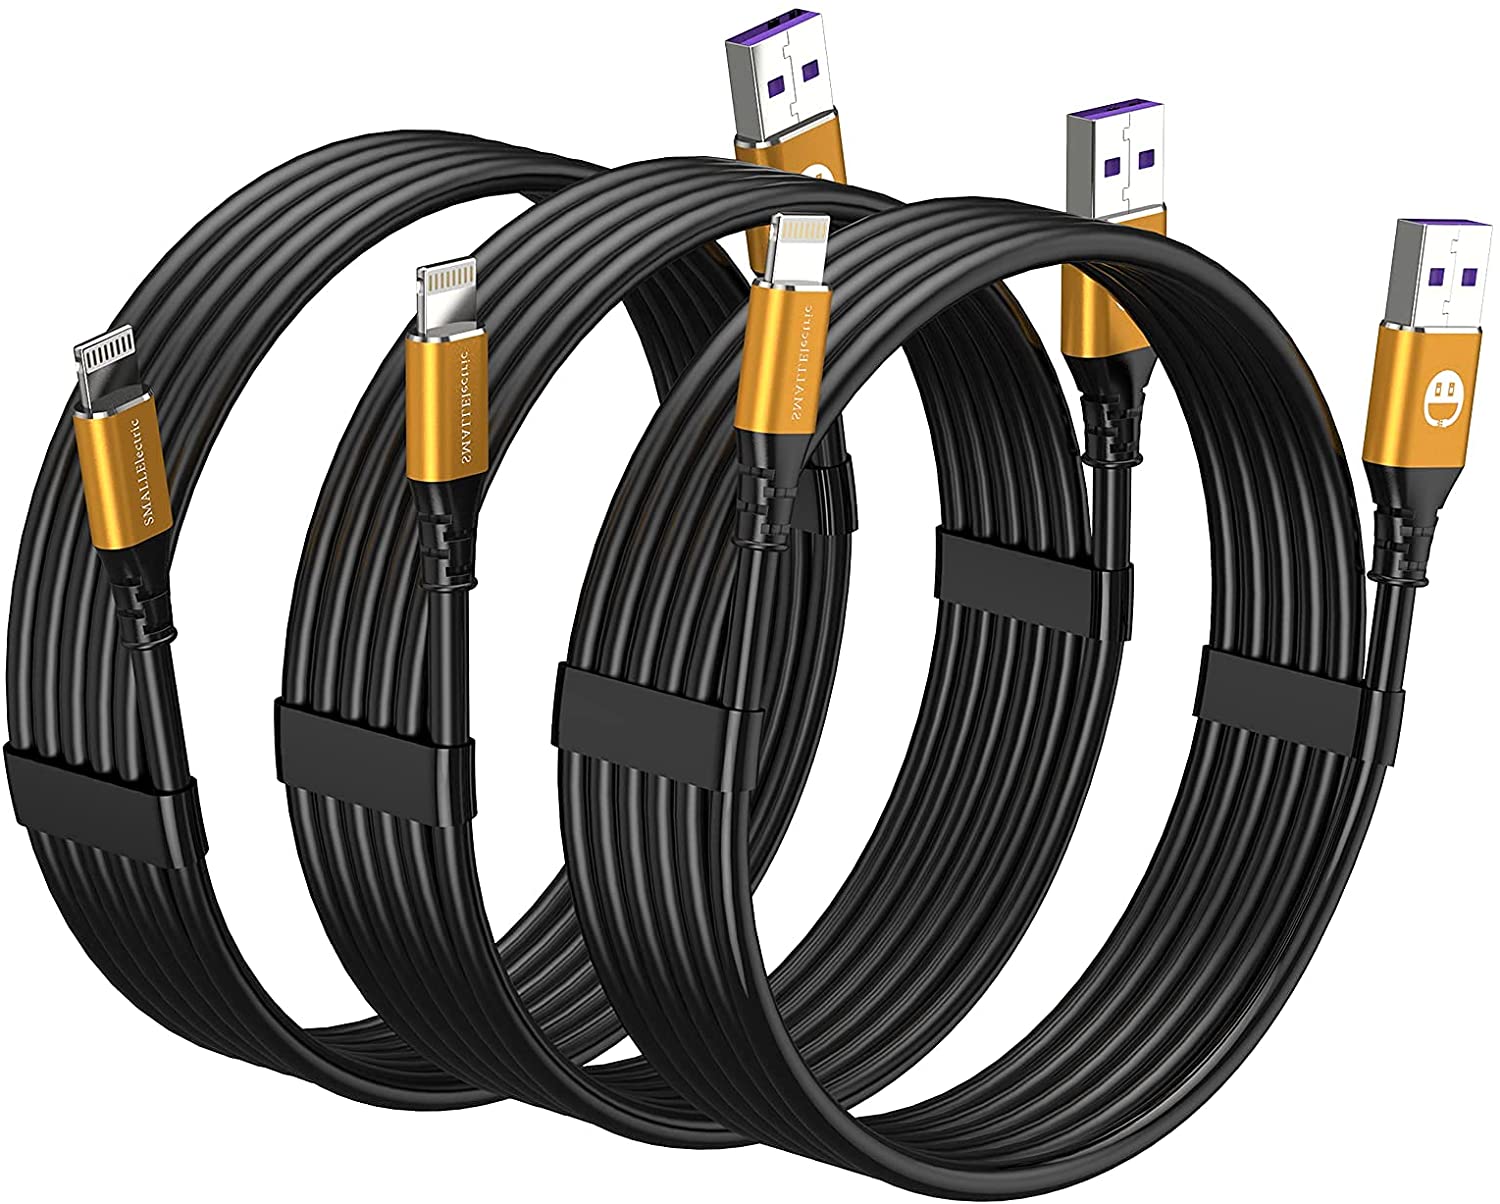 SMALLElectric Gold Alloy Lightning Cable, 3-Pack